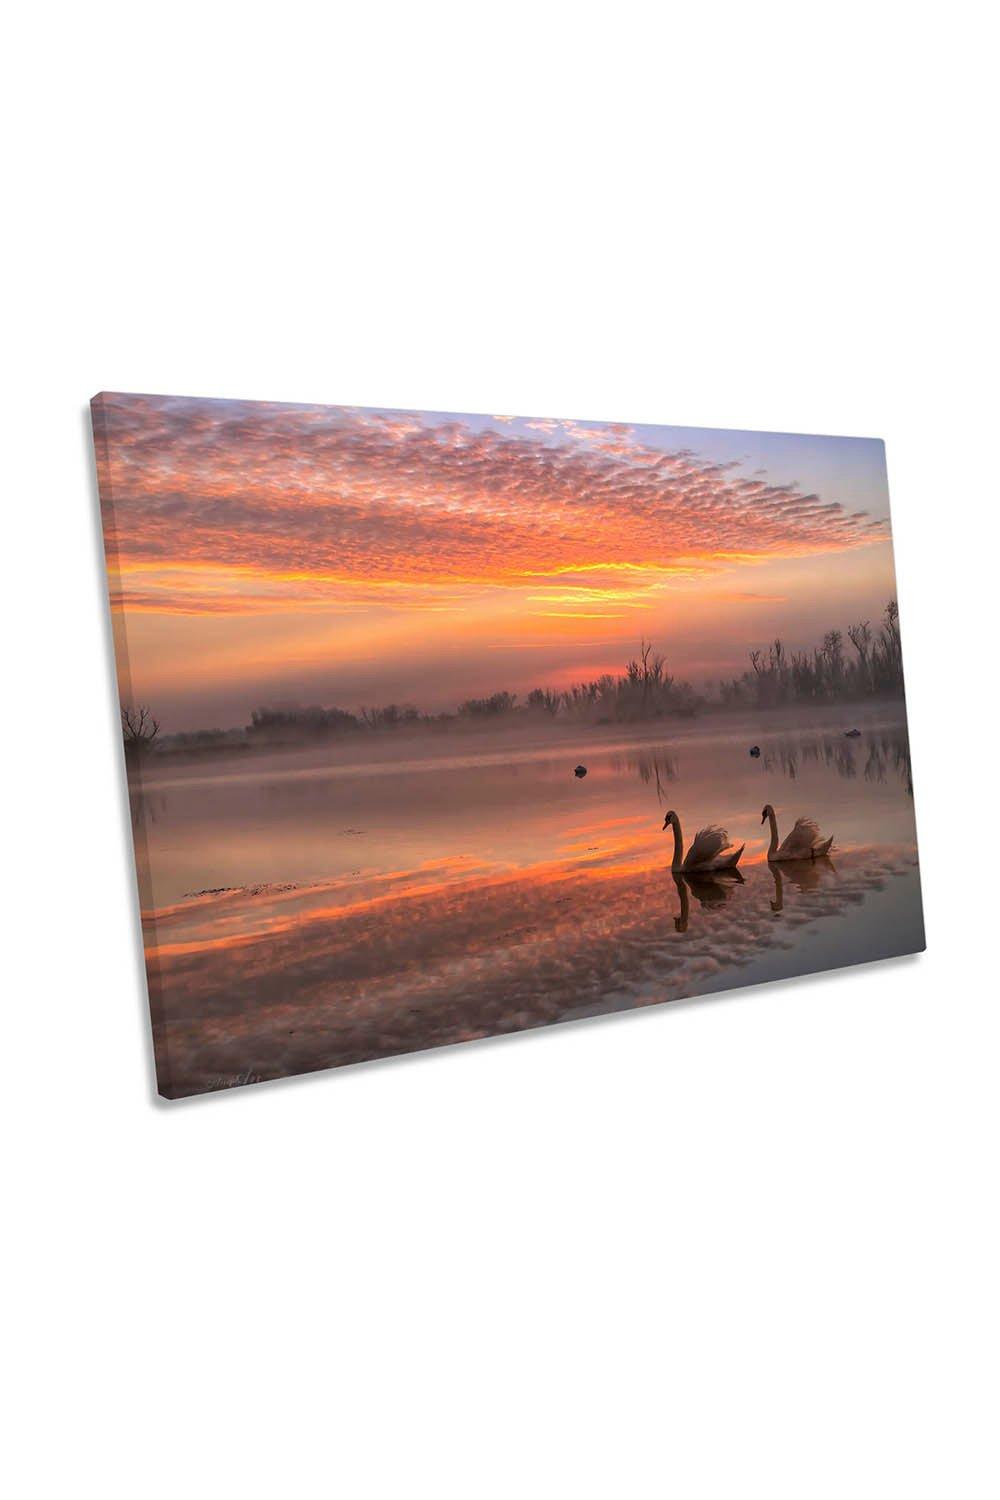 Rosy Romance Swans Lake Morning Sunrise Canvas Wall Art Picture Print